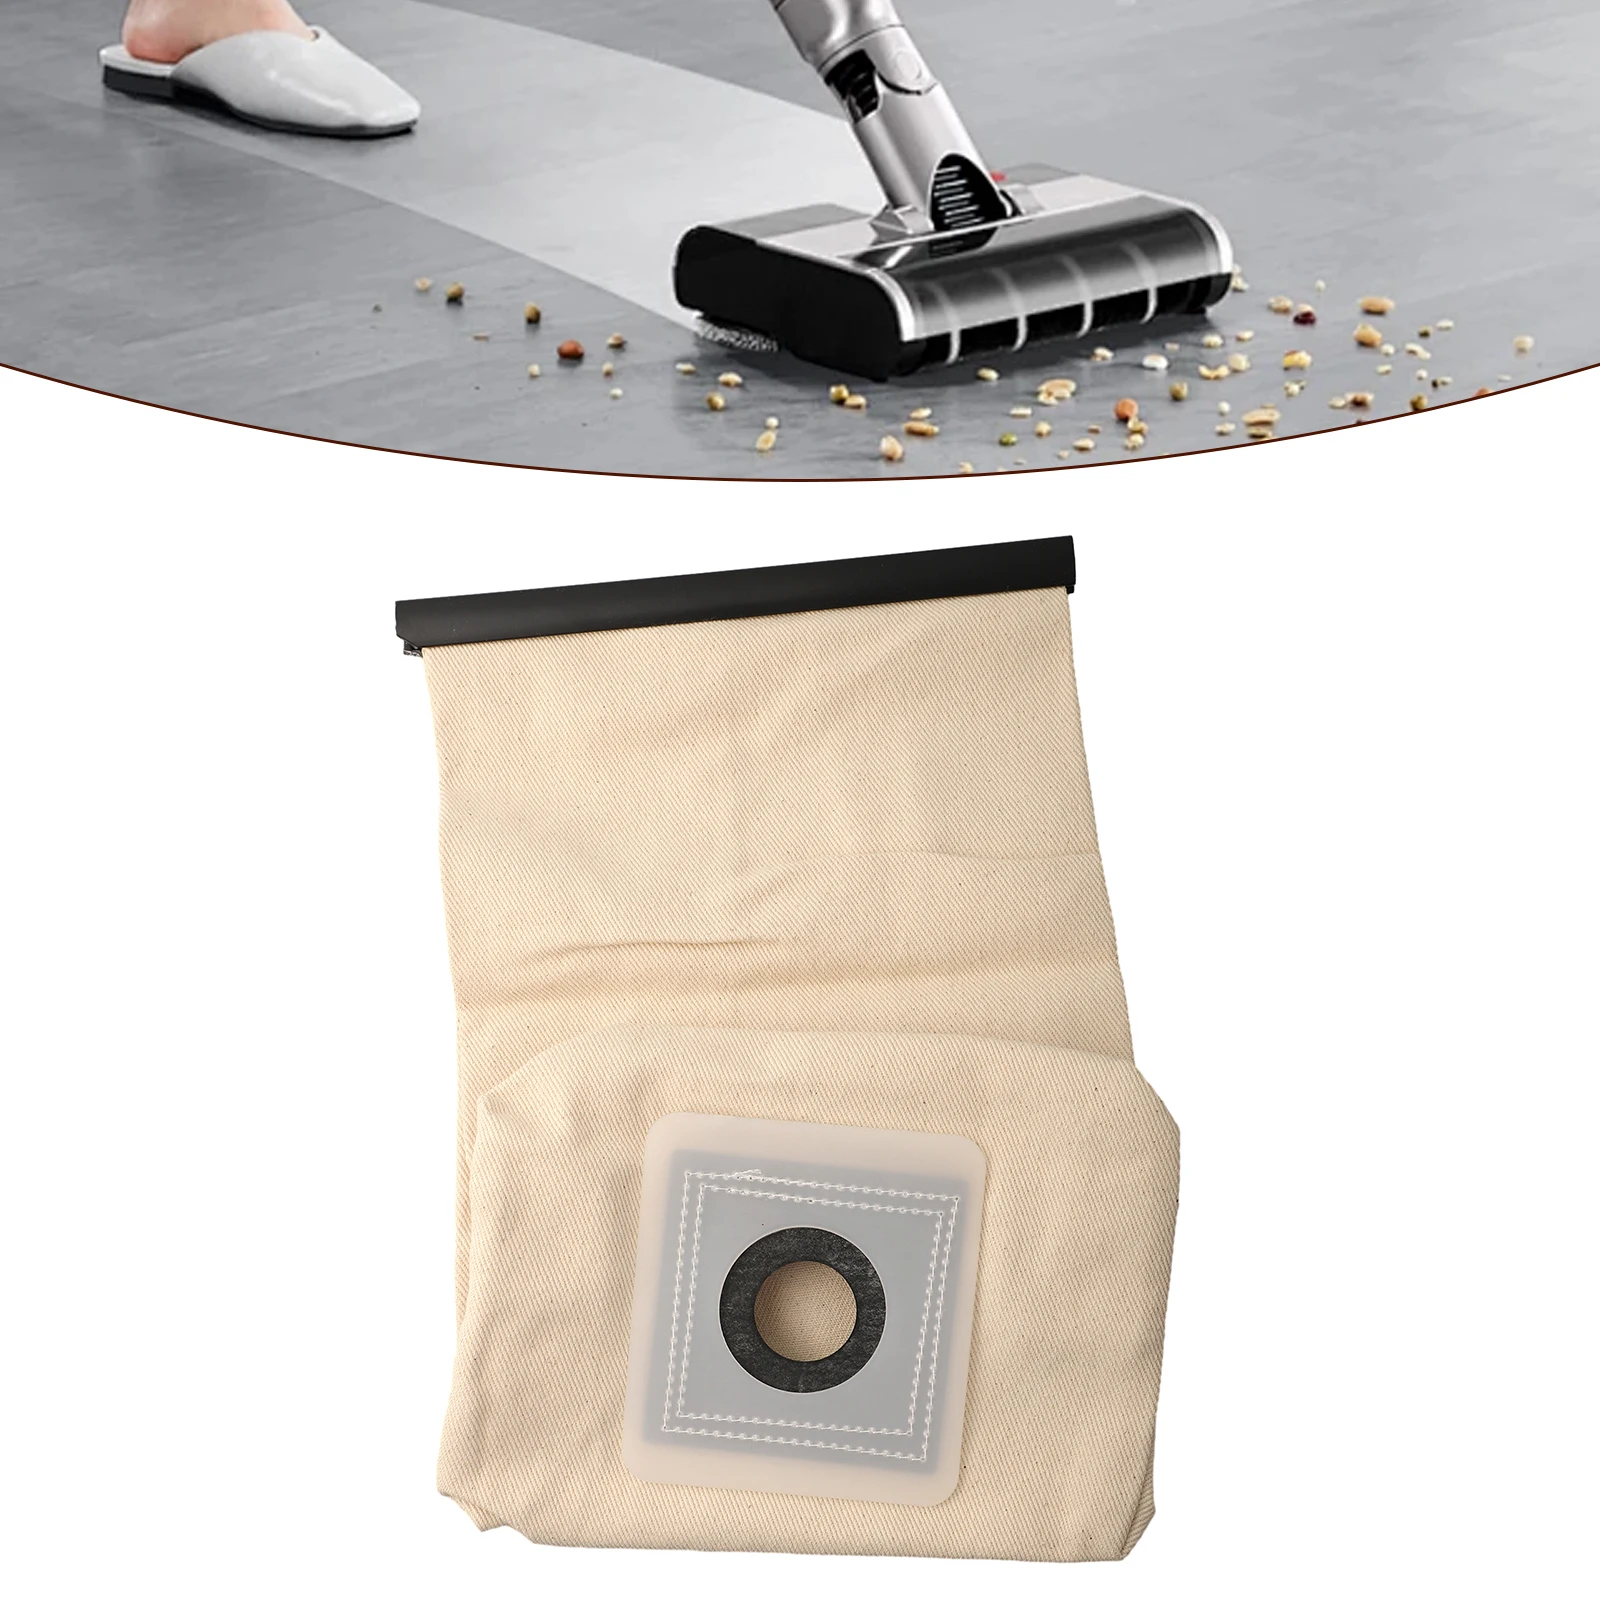 Vacuum Bags Dust Bag Reusable 95332110 9.533-211.0 Cleaning Tool For Hoover Filter Non-woven Dust Bag For Karcher vacuum bags dust bag sweeper parts washable 1pc 95332110 9 533 211 0 cleaning tool for hoover filter non woven dust bag